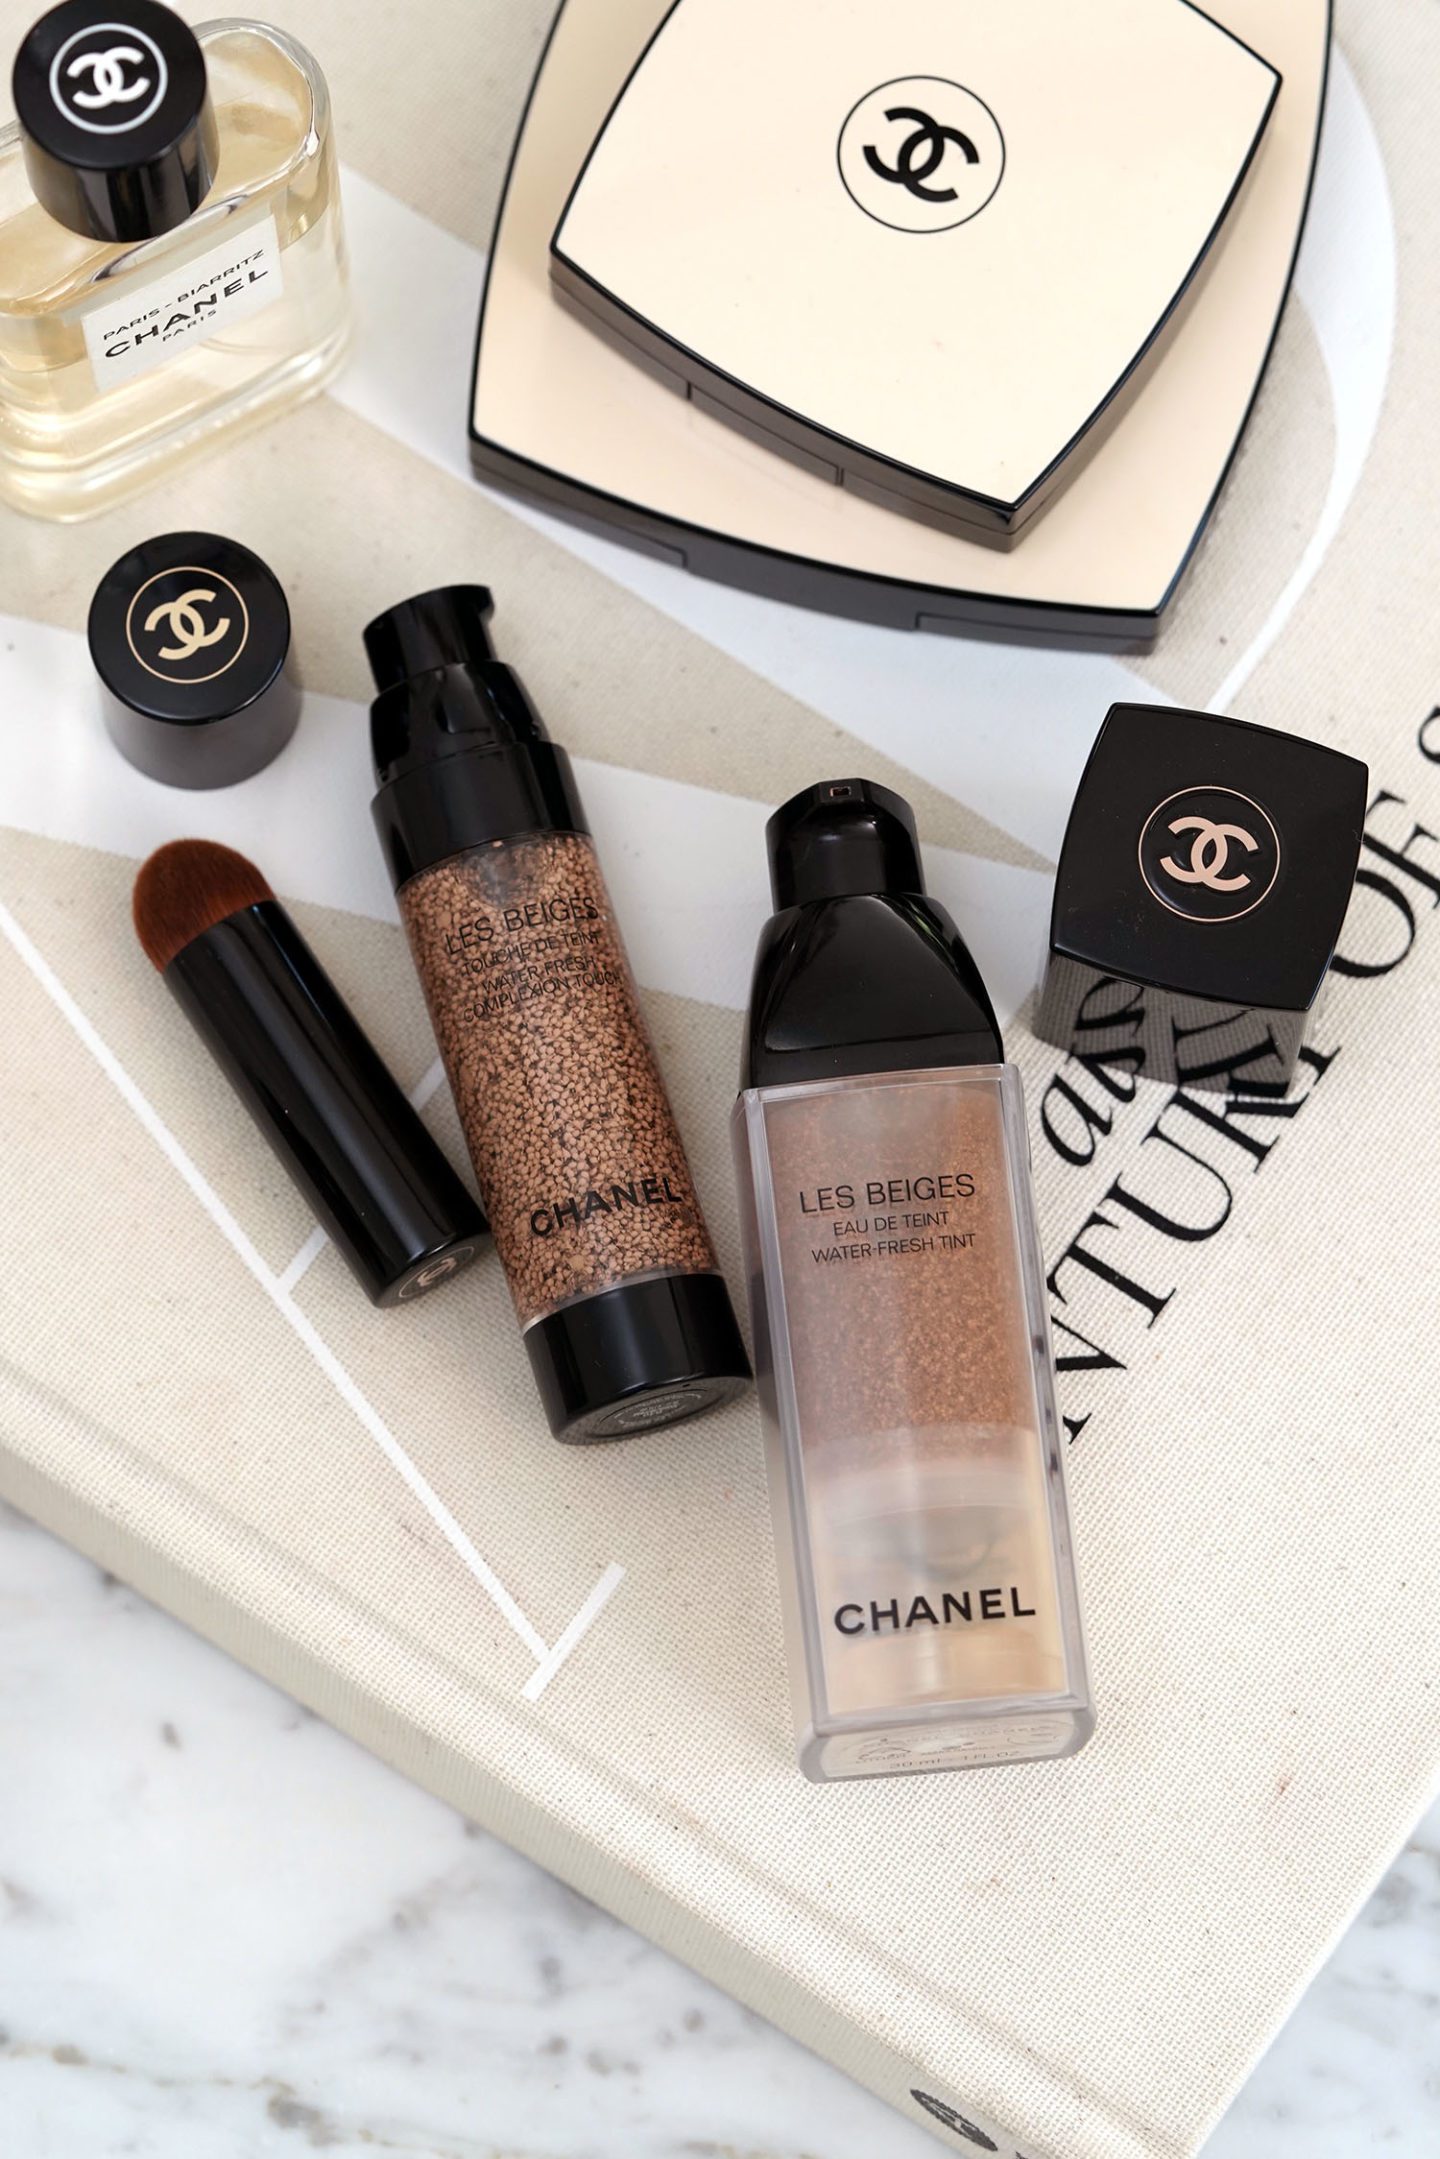 Chanel Les Beiges Water-Fresh Complexion Tint 